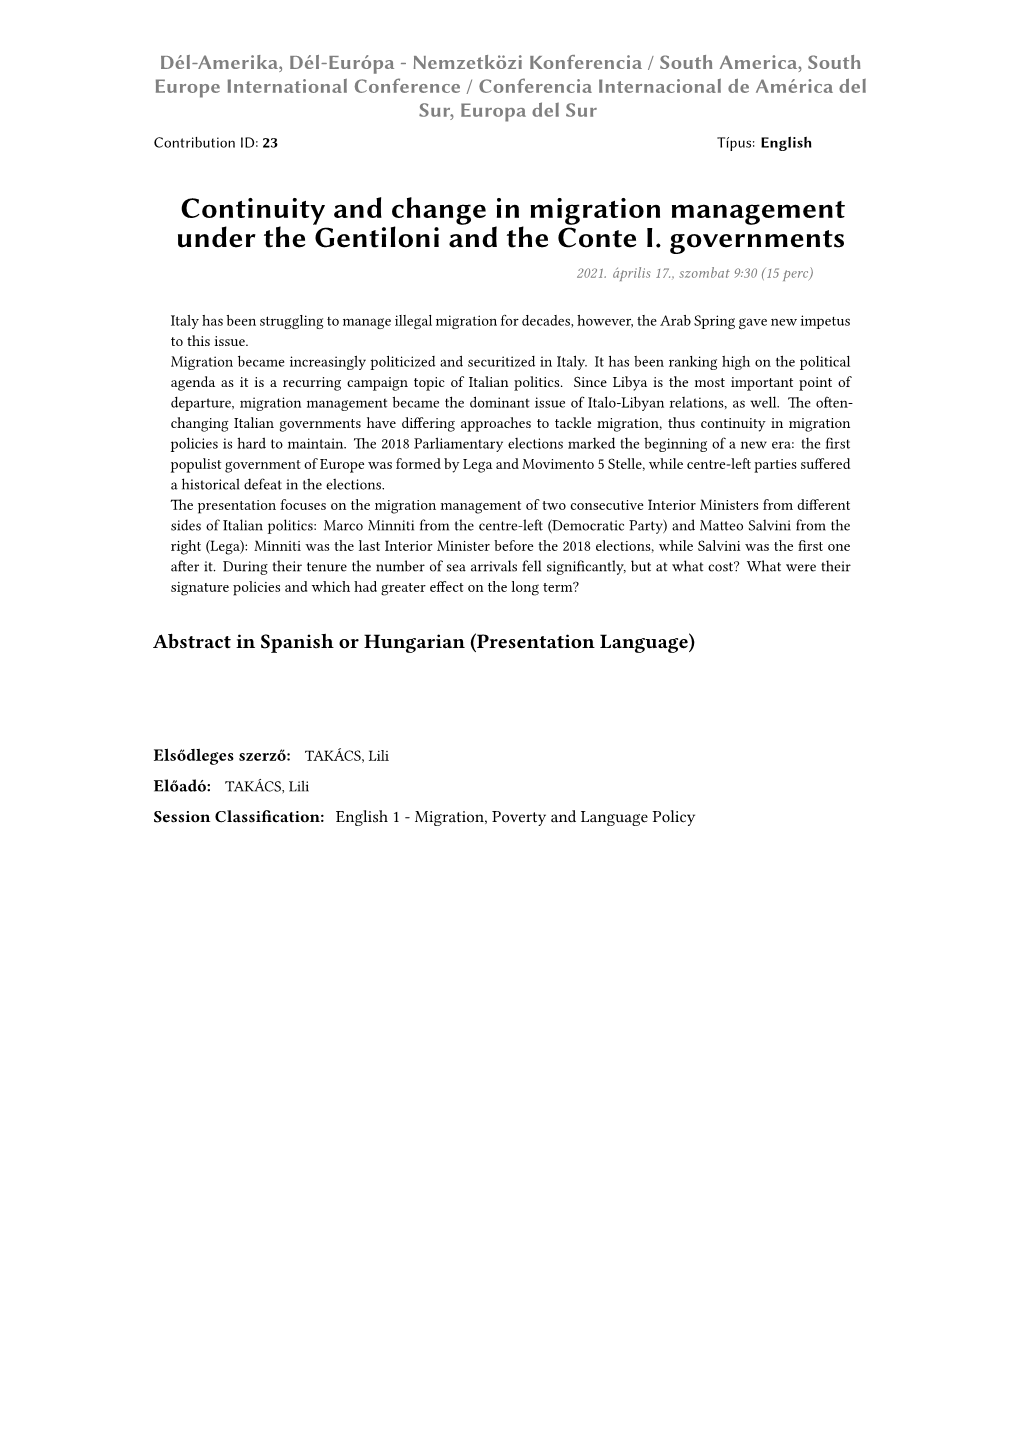 Continuity and Change in Migration Management Under the Gentiloni and the Conte I